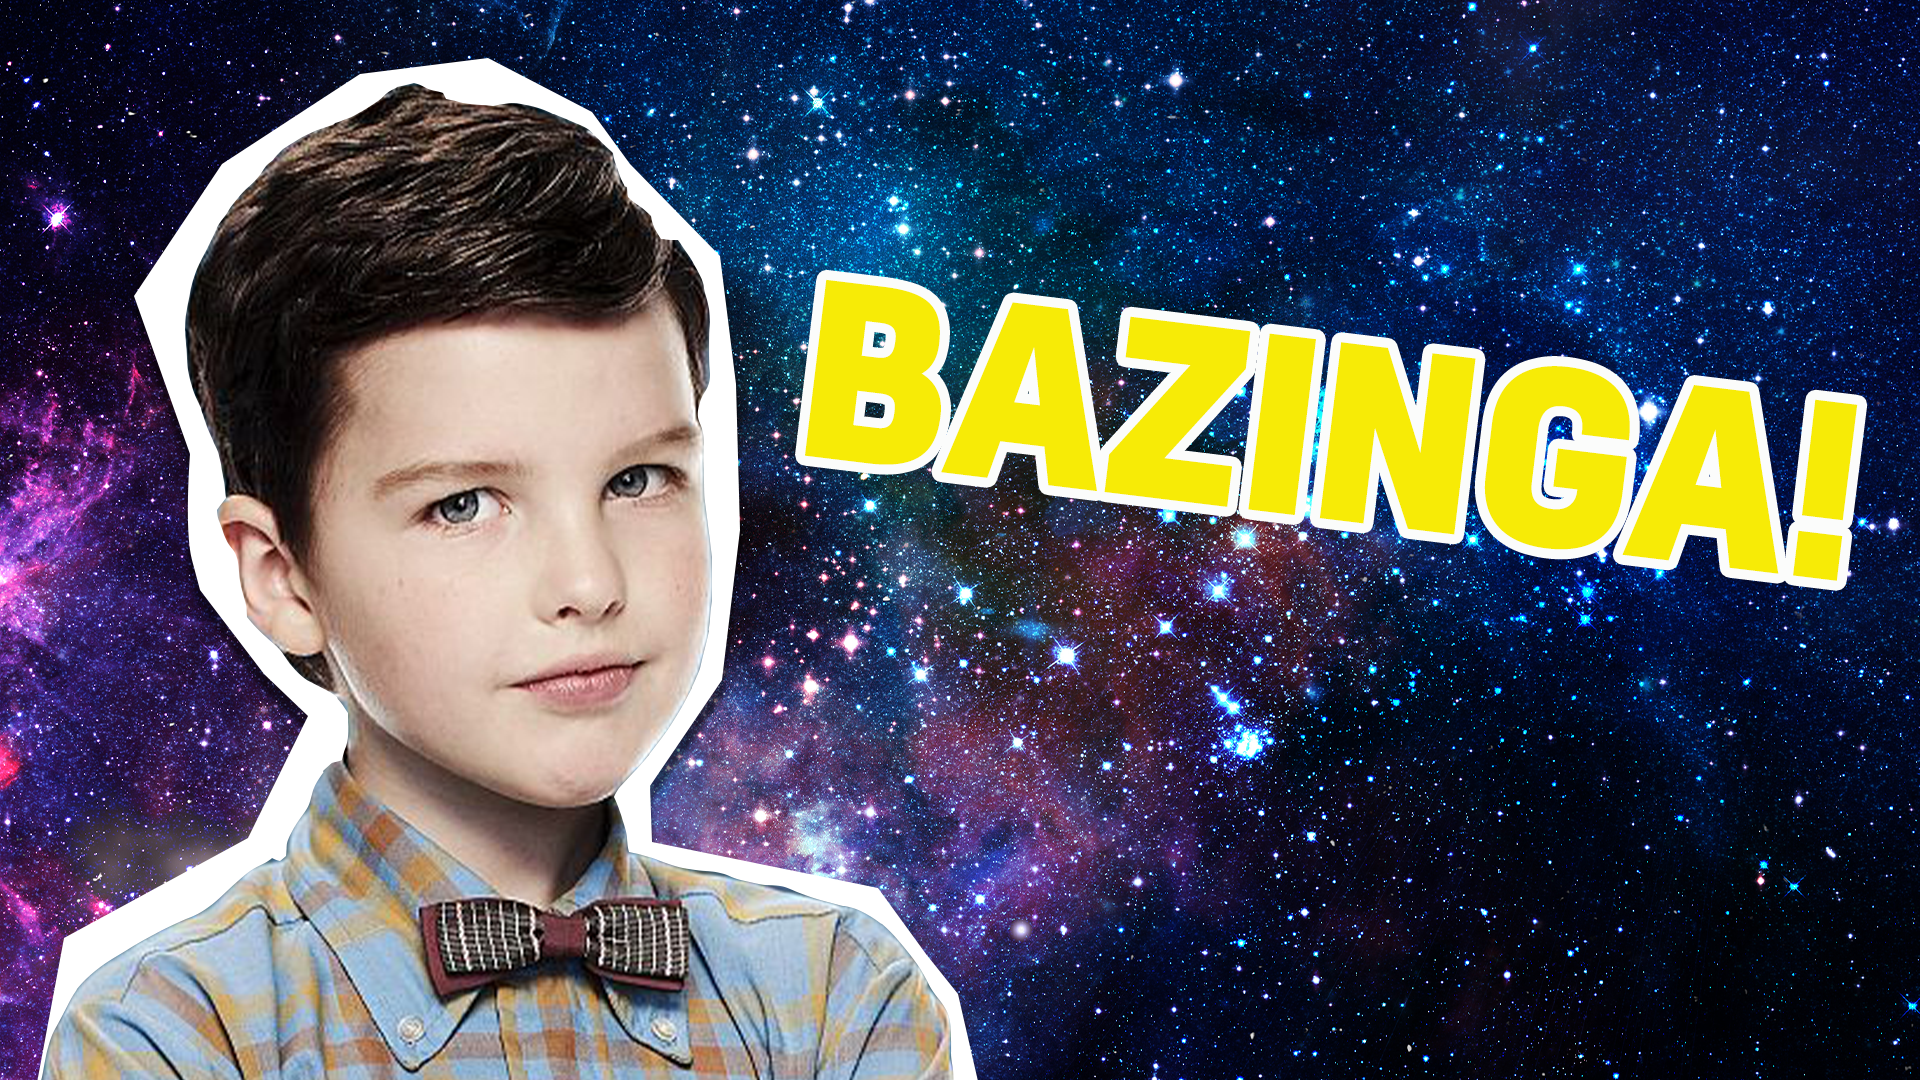 Bazinga! You're officially series 2's top expert! Congrats! Sheldon himself couldn't have done better!